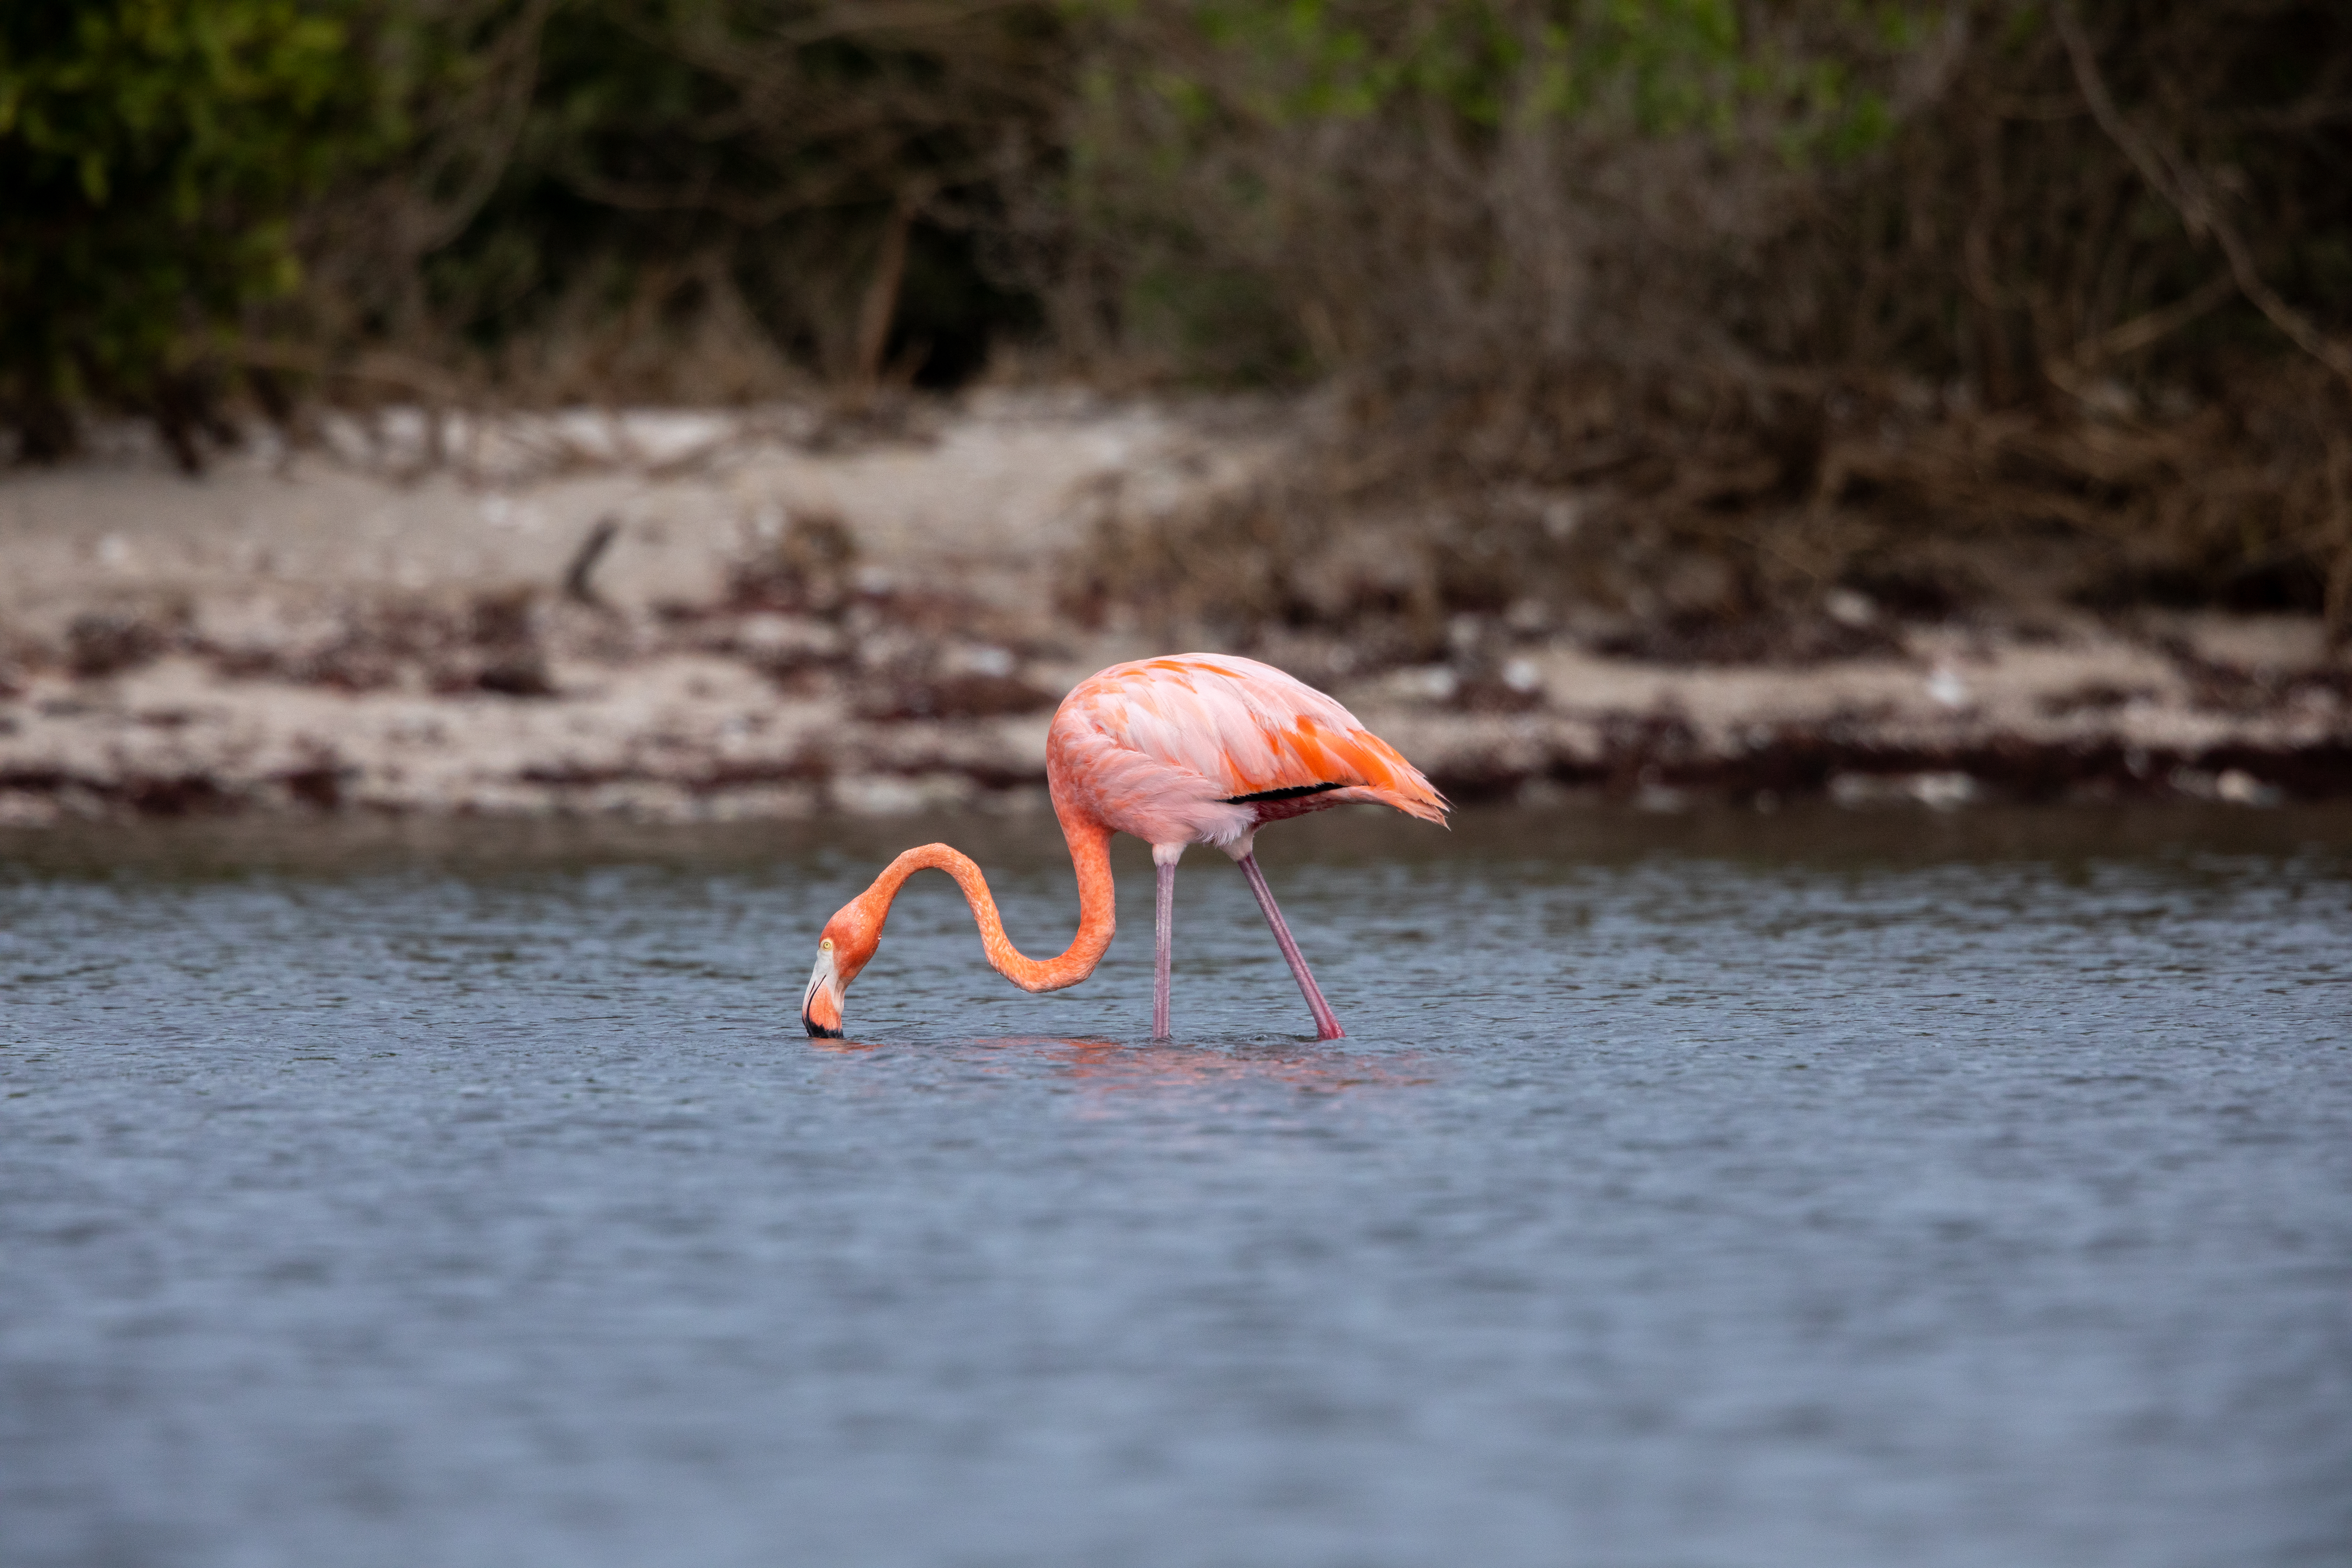 A flamingo lowers its neck to drink from the water it is standing in. Its neck bends like a backwards letter S and its legs are slightly spread apart. The flamingo's body is a rosy pink, with darker pink legs, and a more coral pink color on its neck and wings.